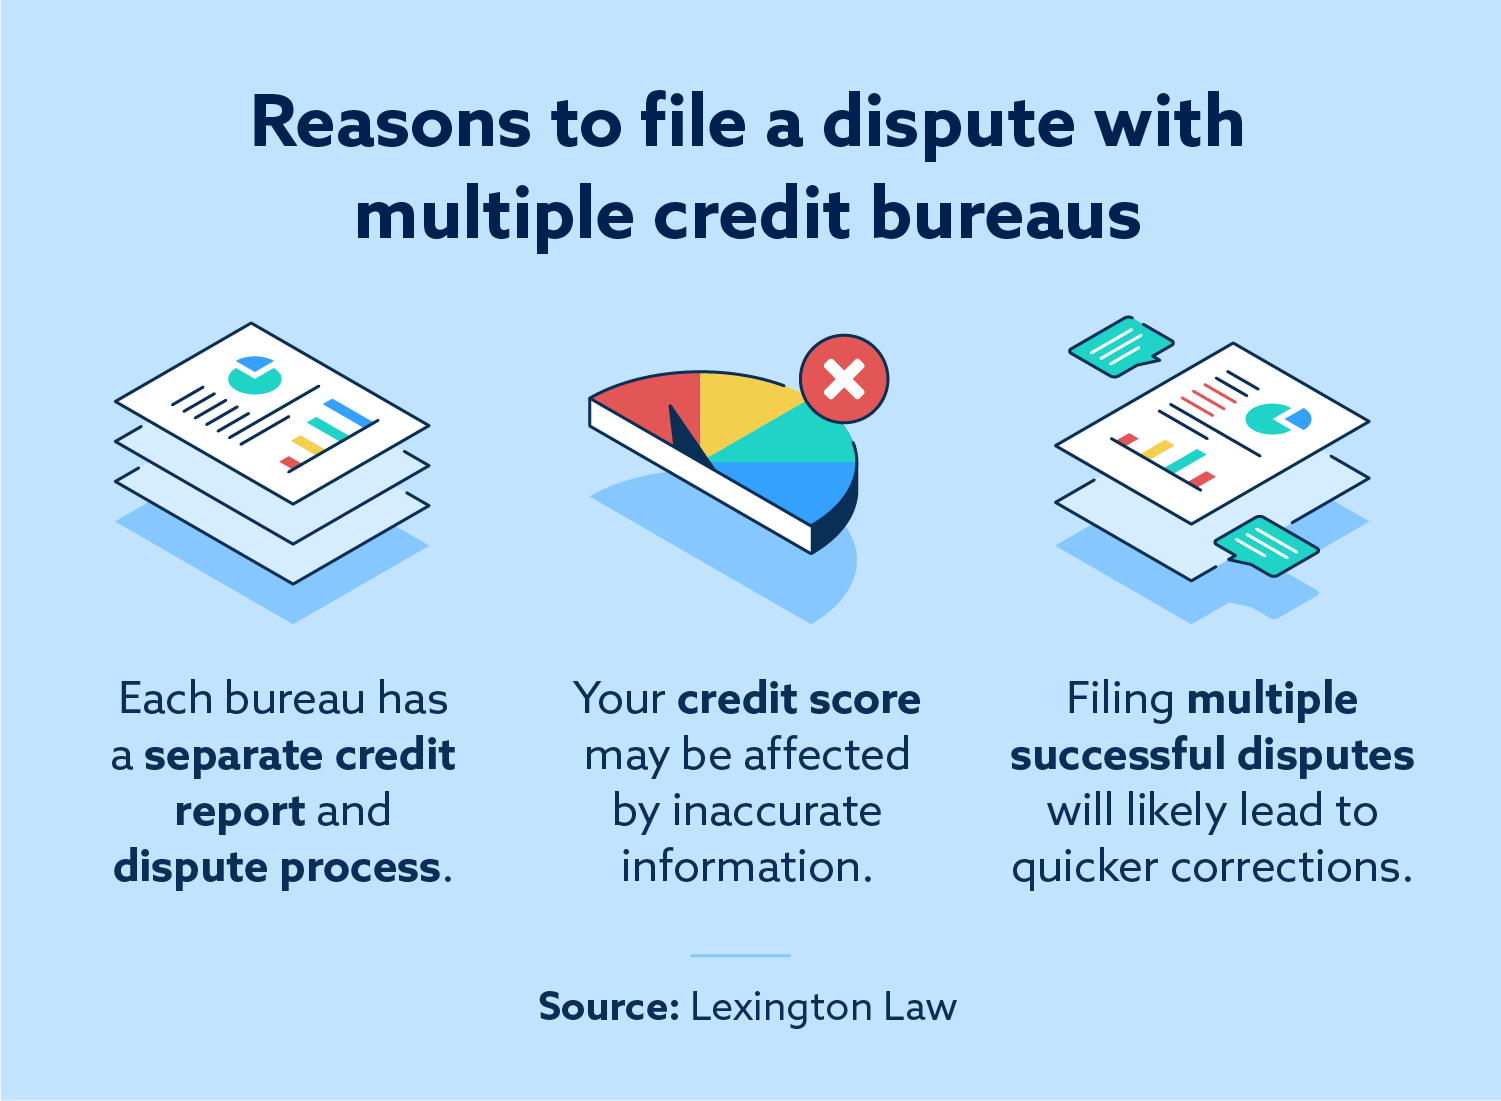 Reasons to file multiple credit disputes at the same time.